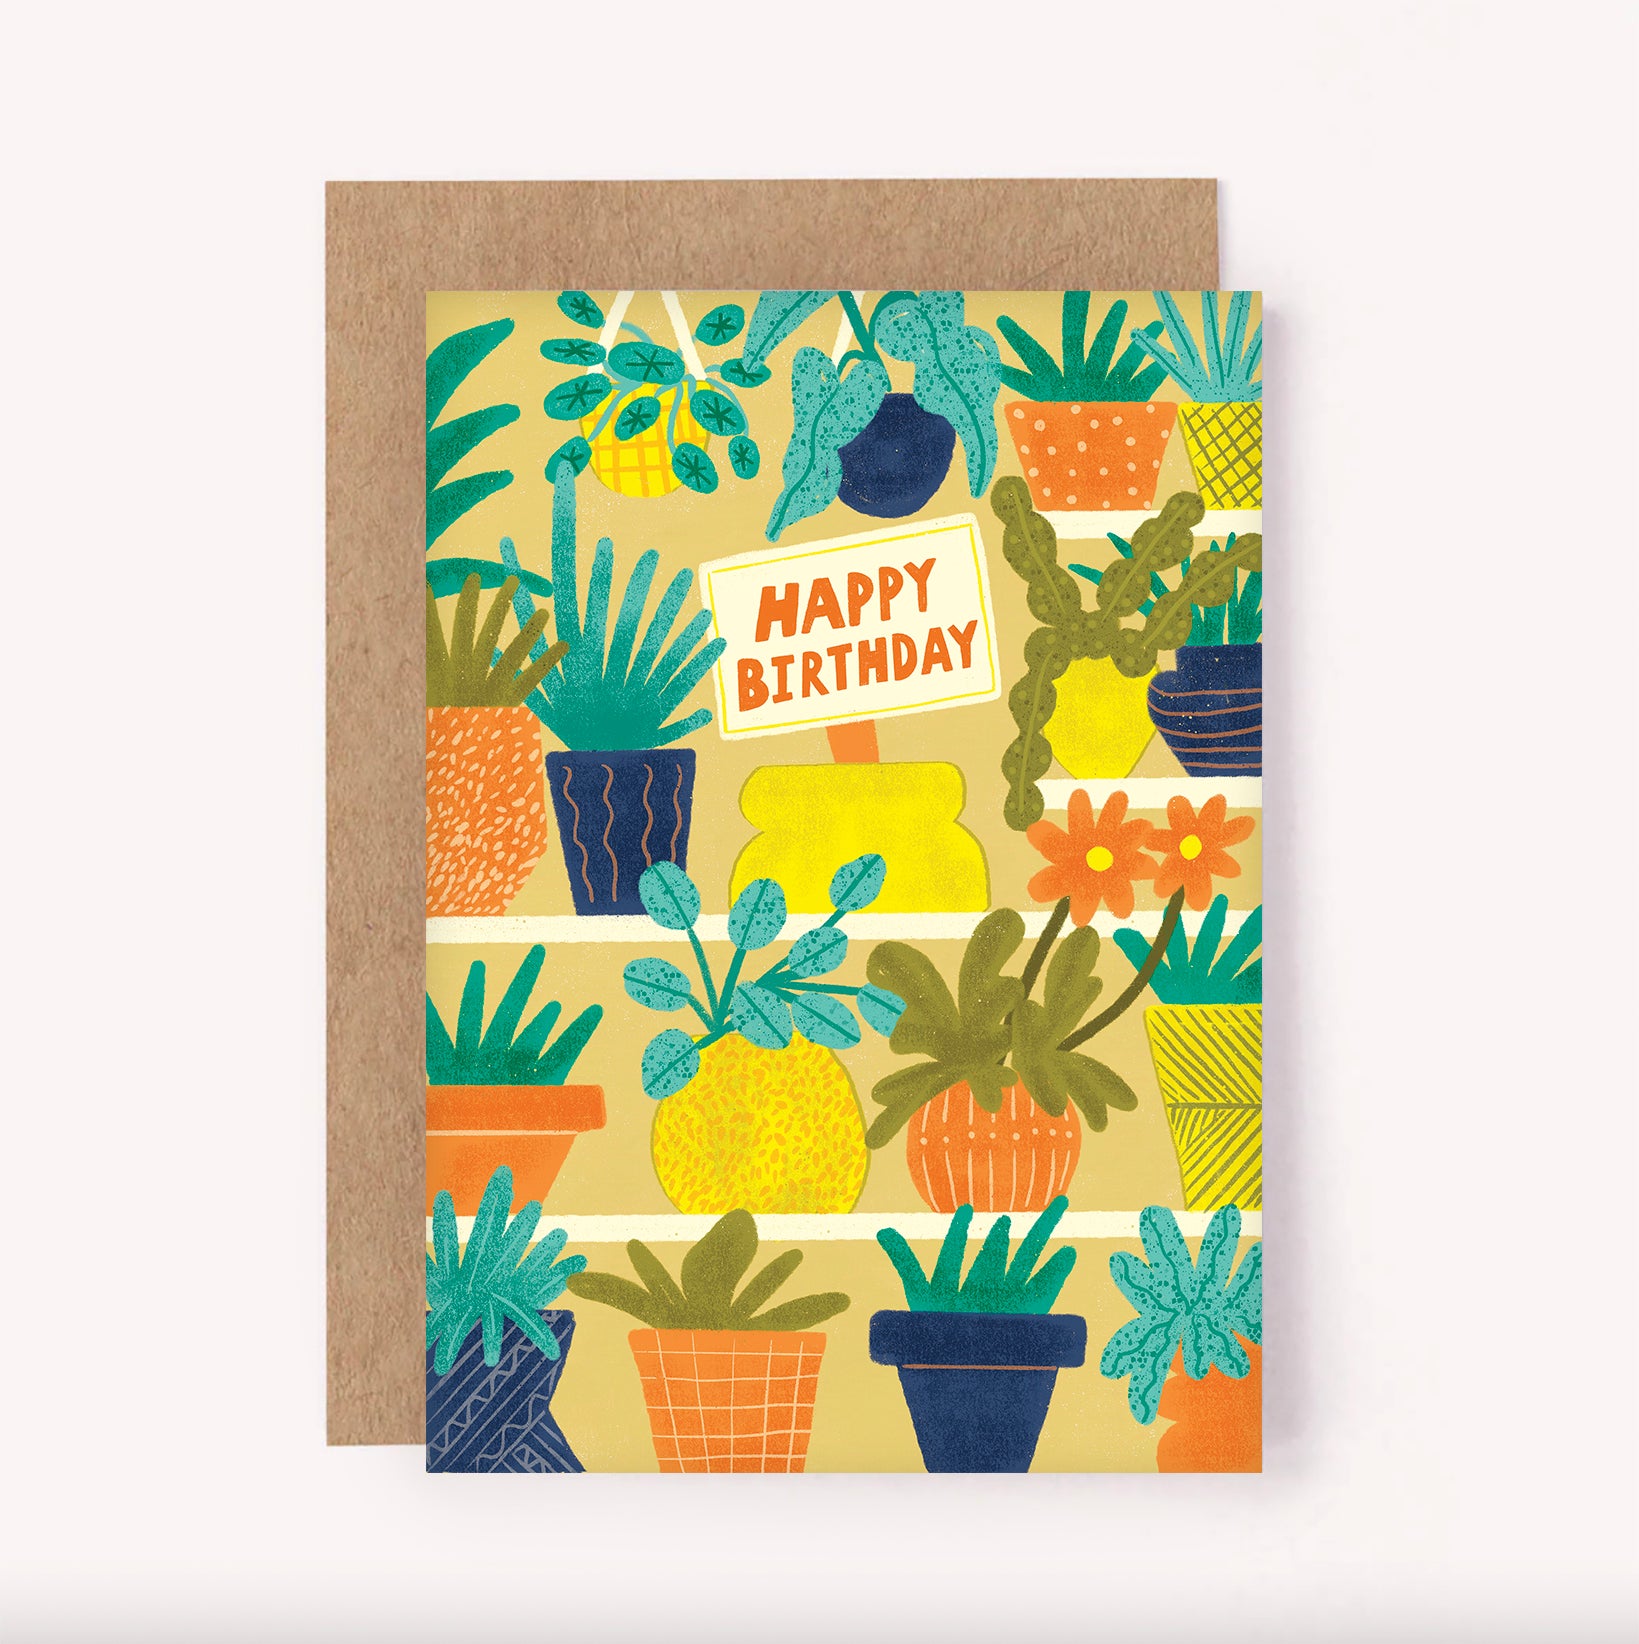 This birthday card features rows of beautiful, illustrated potted plants and hanging baskets filled with foliage. "Happy Birthday" is handwritten on a sign in bright orange